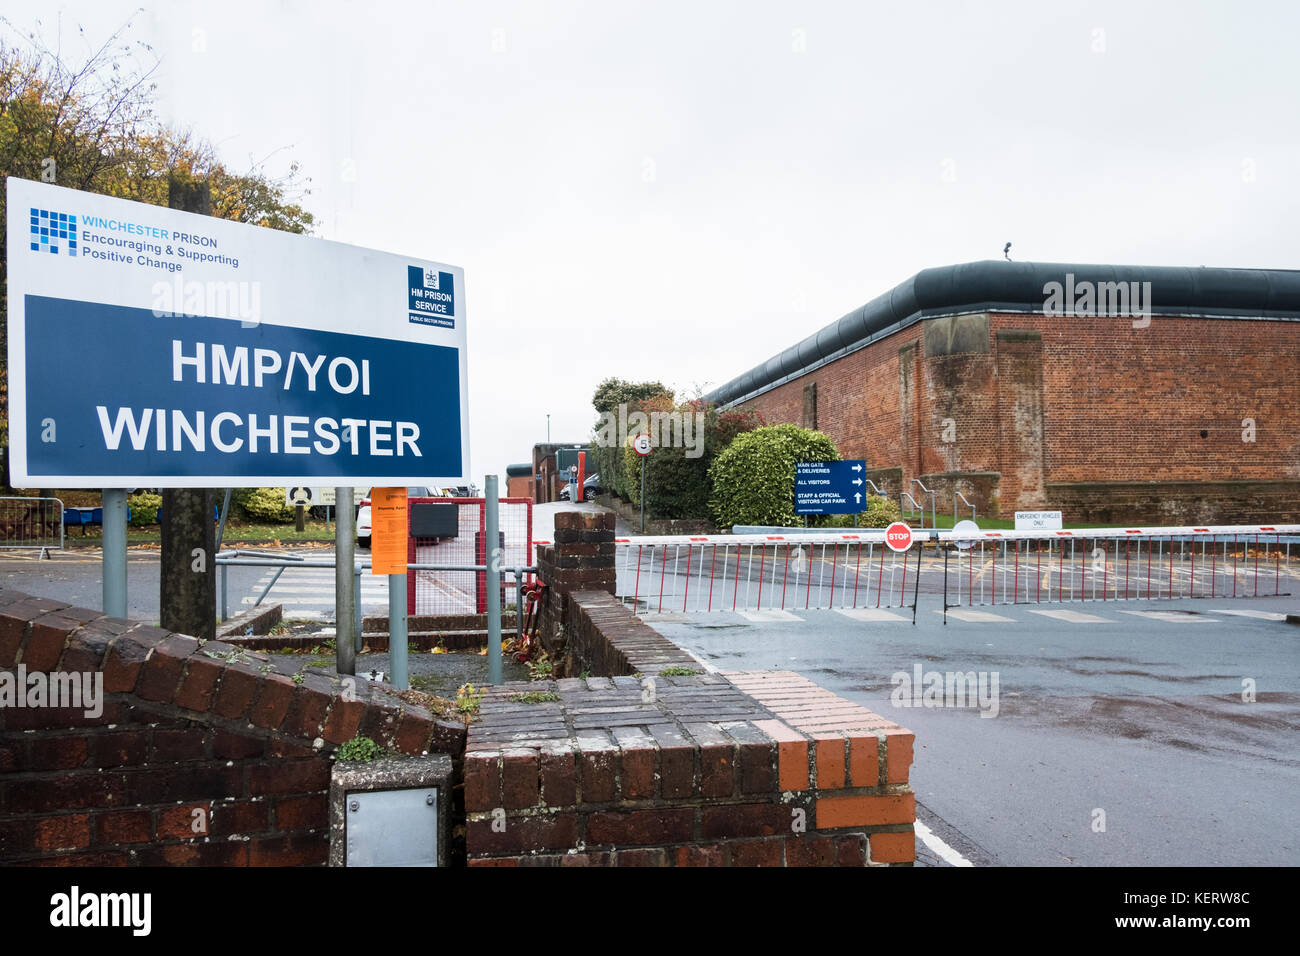 HMP/YOI. Prison Winchester a Category B men's prison, located in Winchester, Hampshire, England. The prison operated by Her Majesty's Prison Service Stock Photo